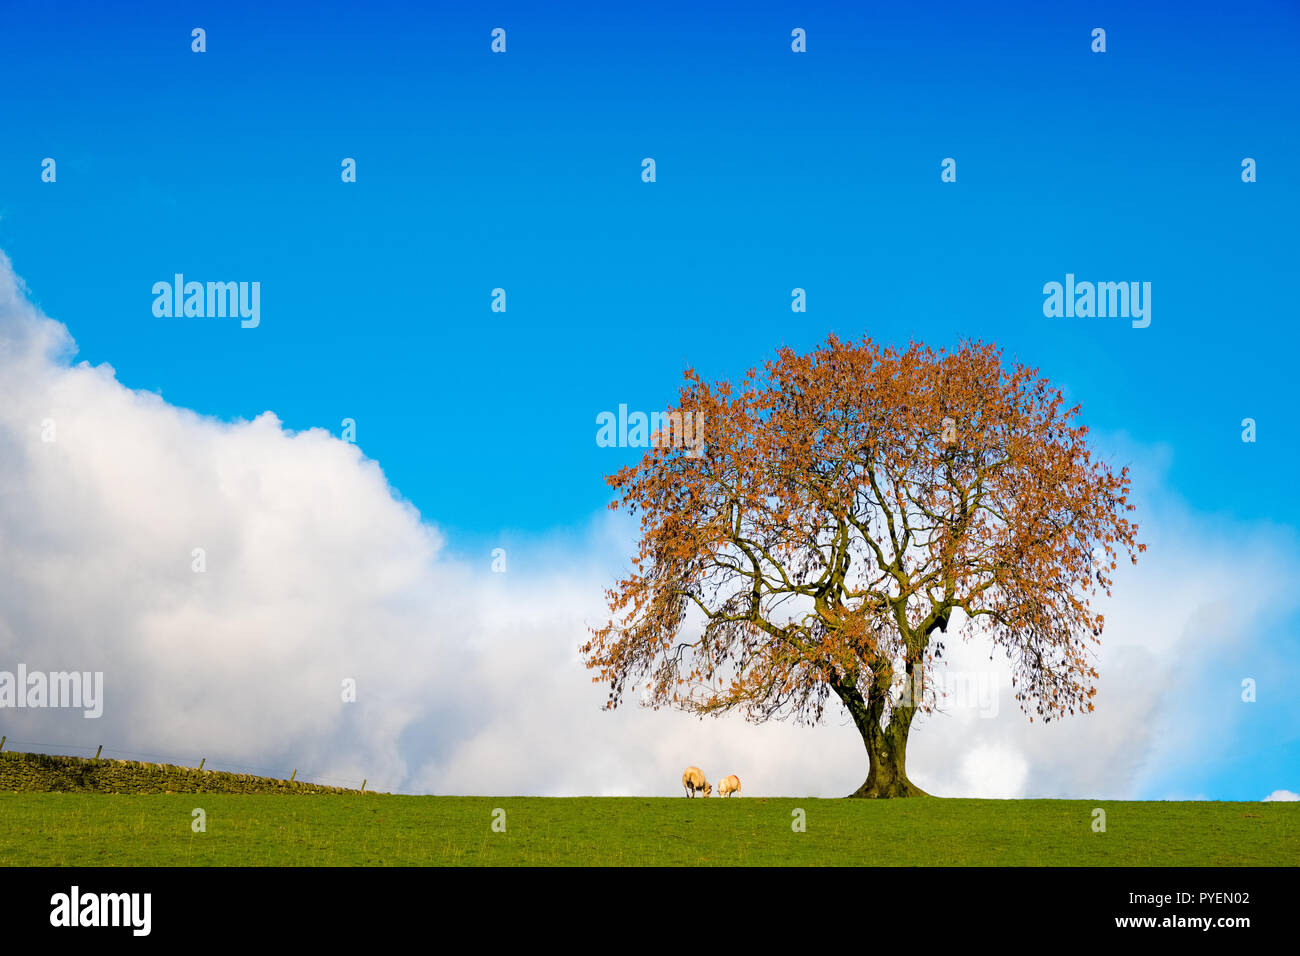 Tree and sheep on skyline with blue sky and white cloud beyond in the Peak District National Park Stock Photo